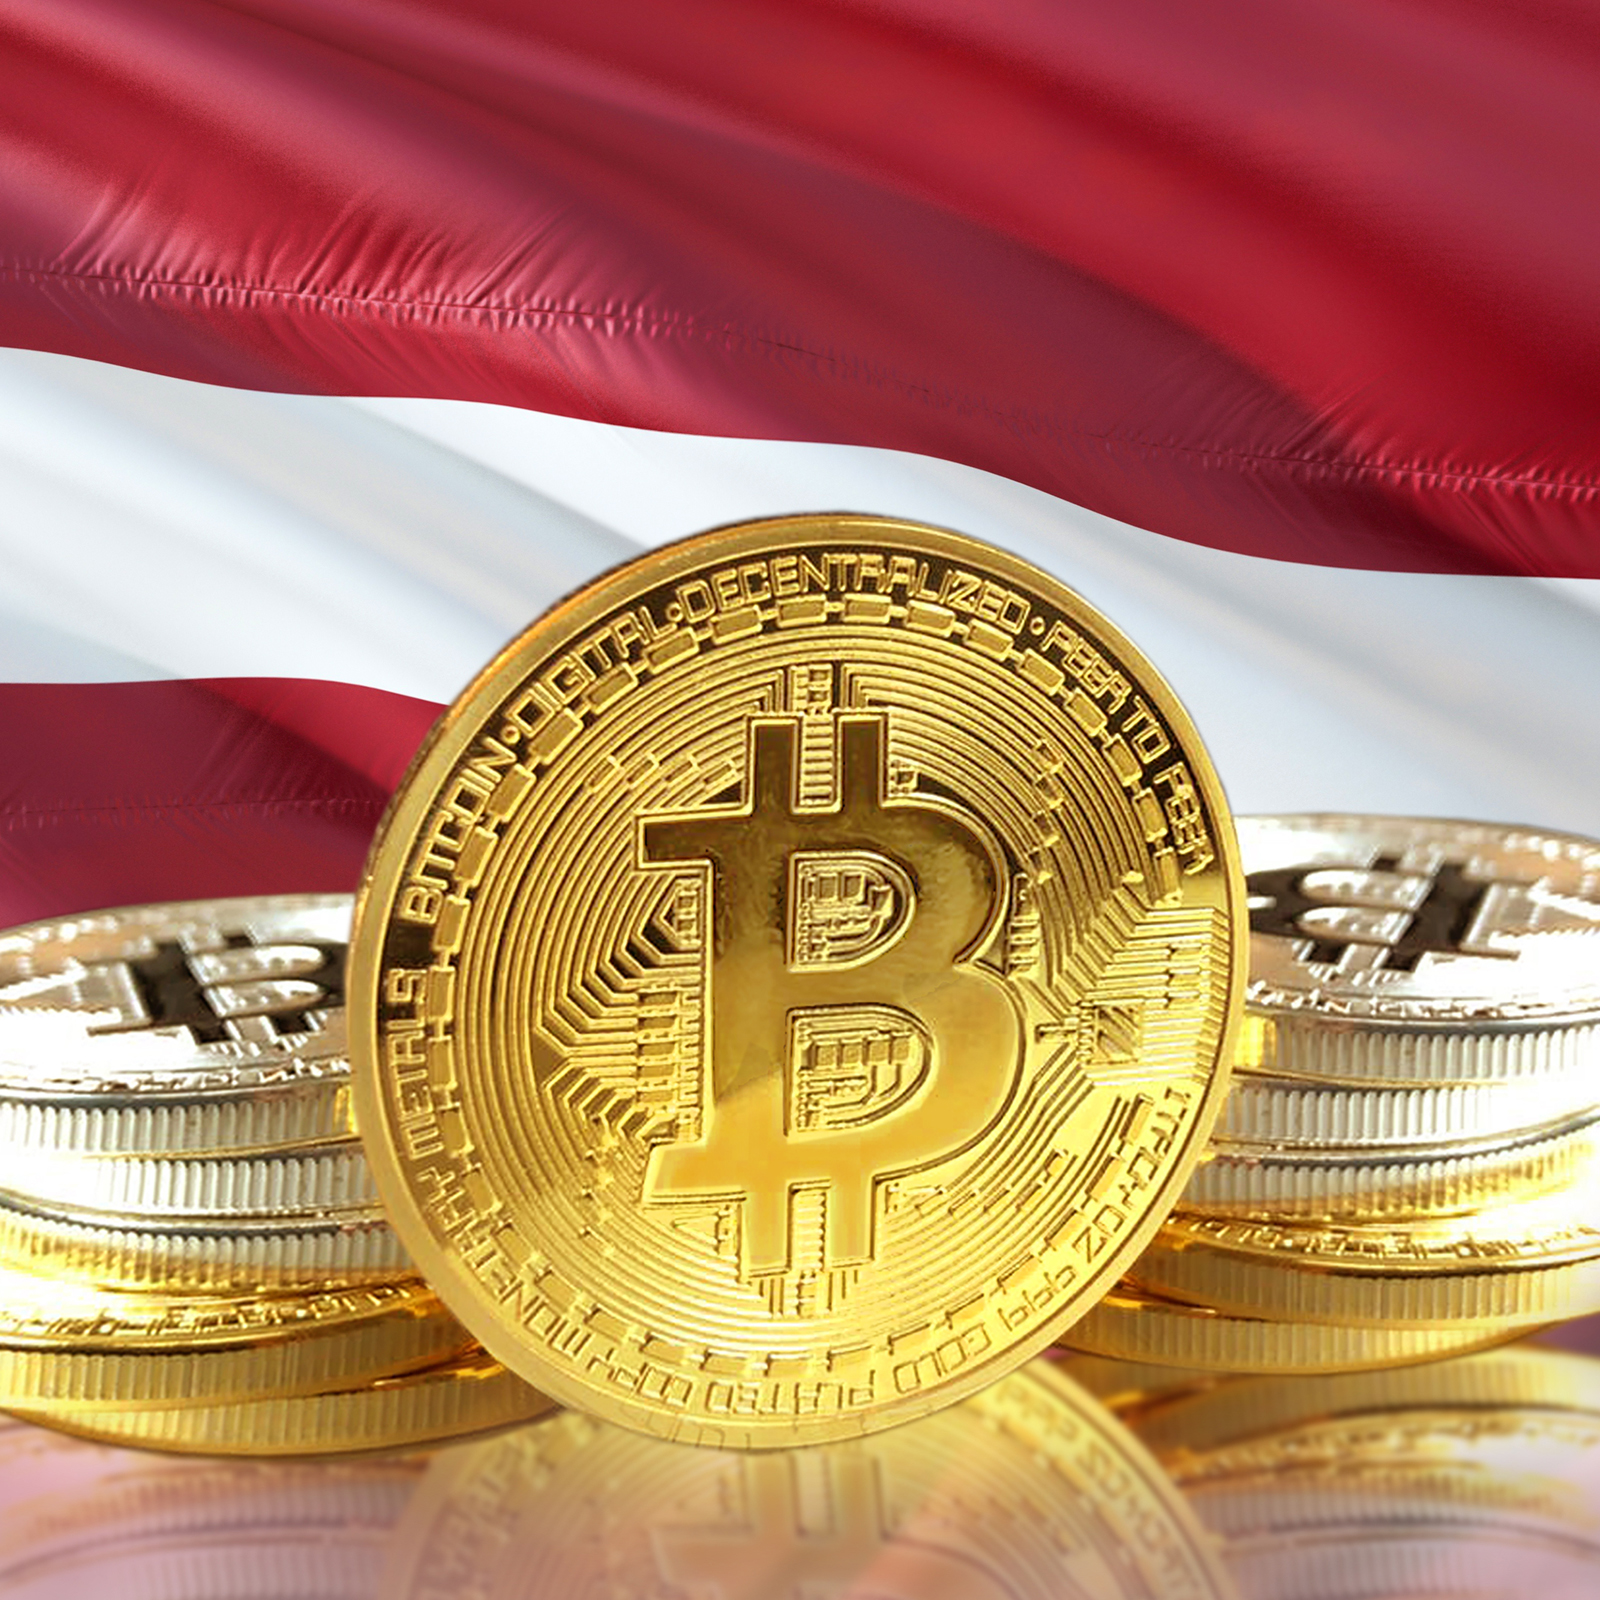 Latvia Recognizes Cryptocurrencies in Order to Tax Them